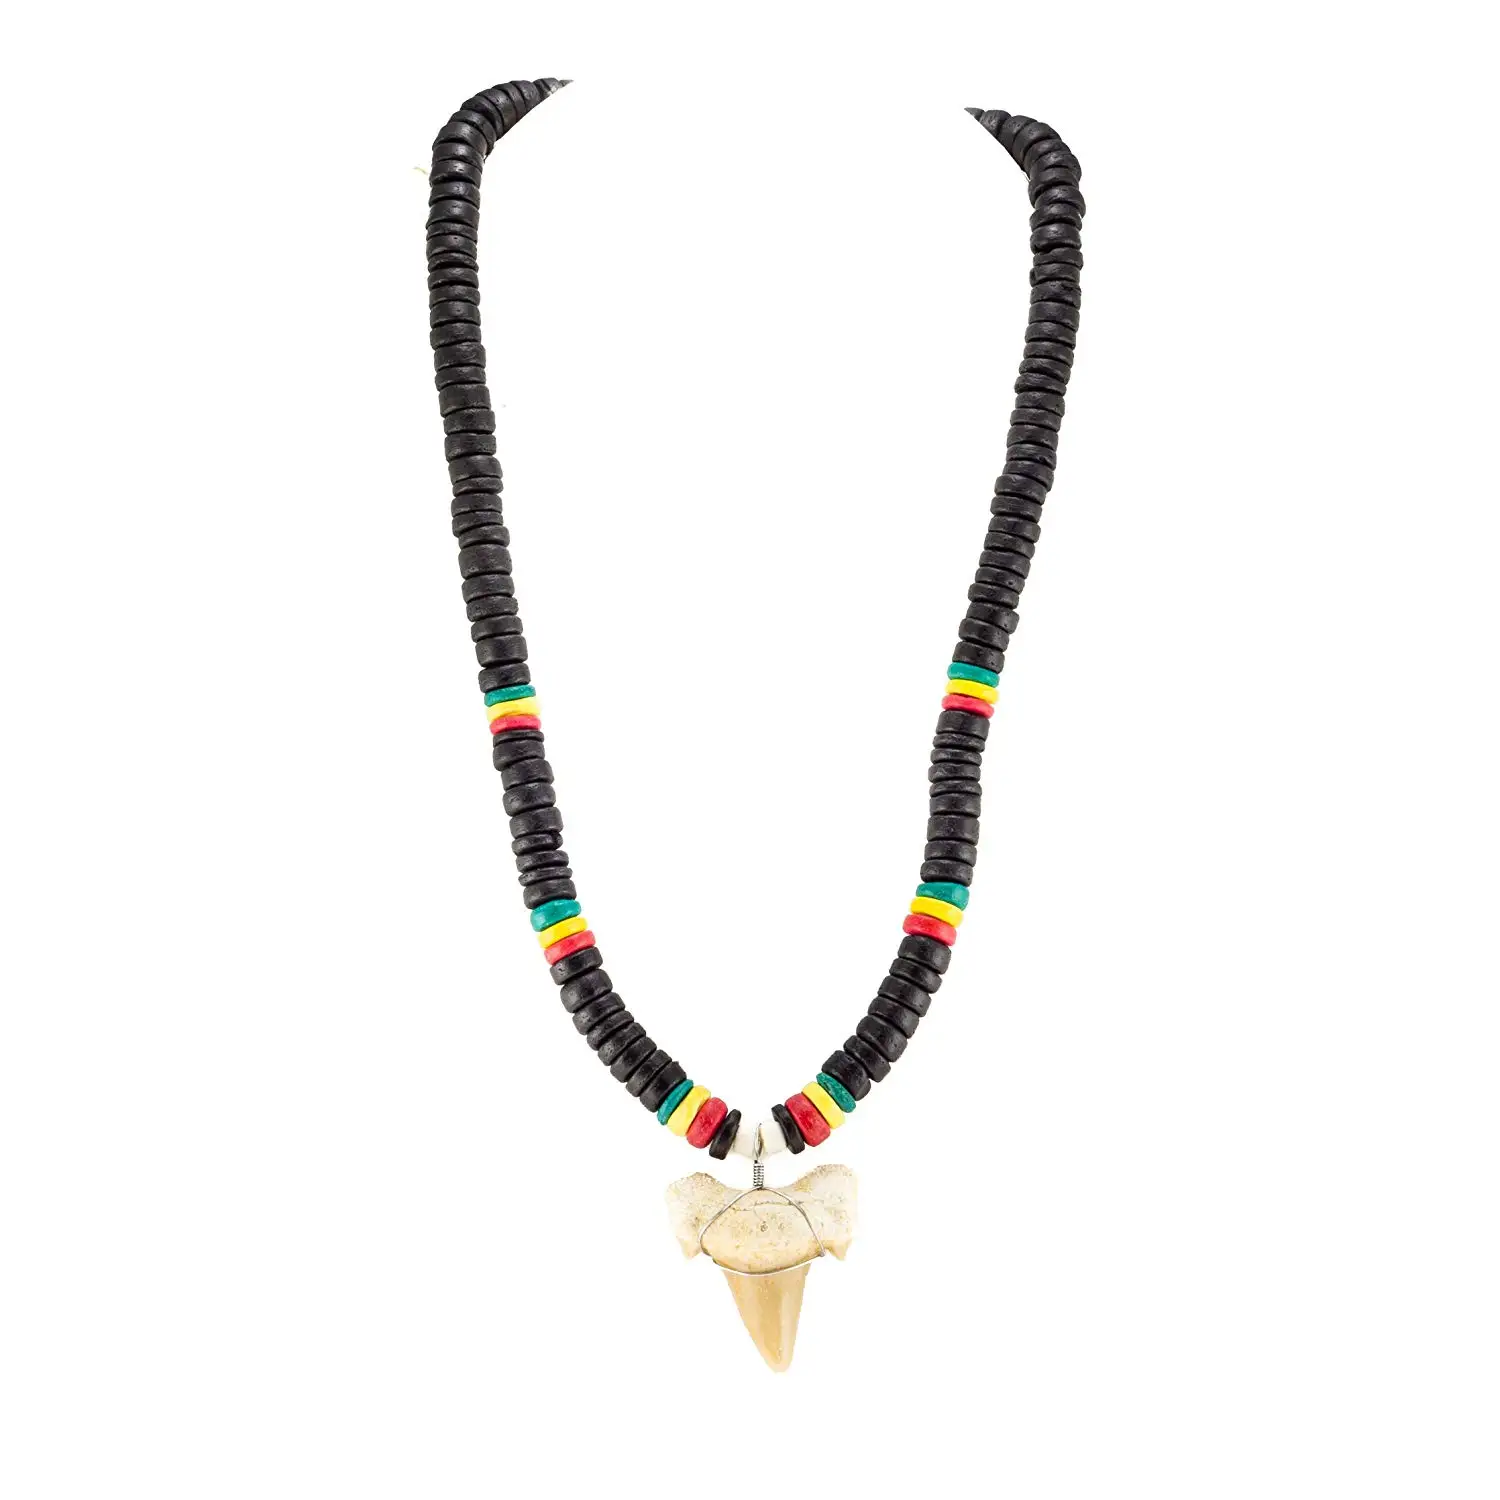 Shark Tooth Pendant on Black Cord Necklace with Rasta Wood Beads